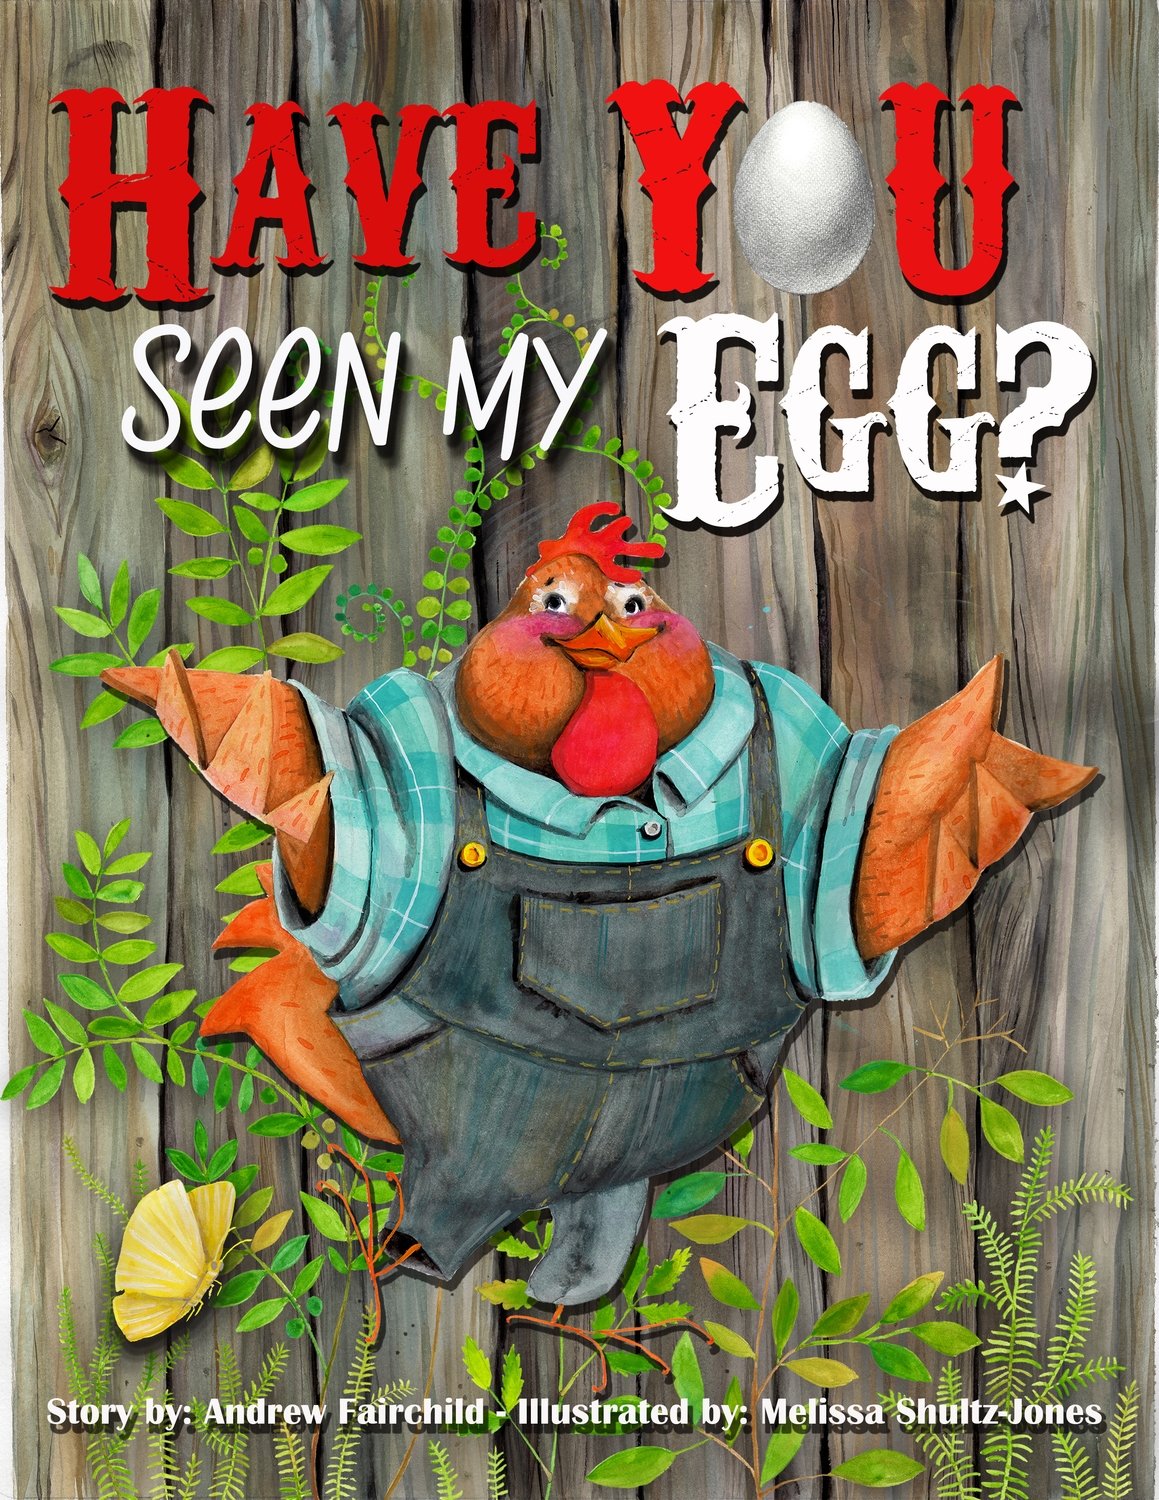 Have You Seen My Egg - Hardcover